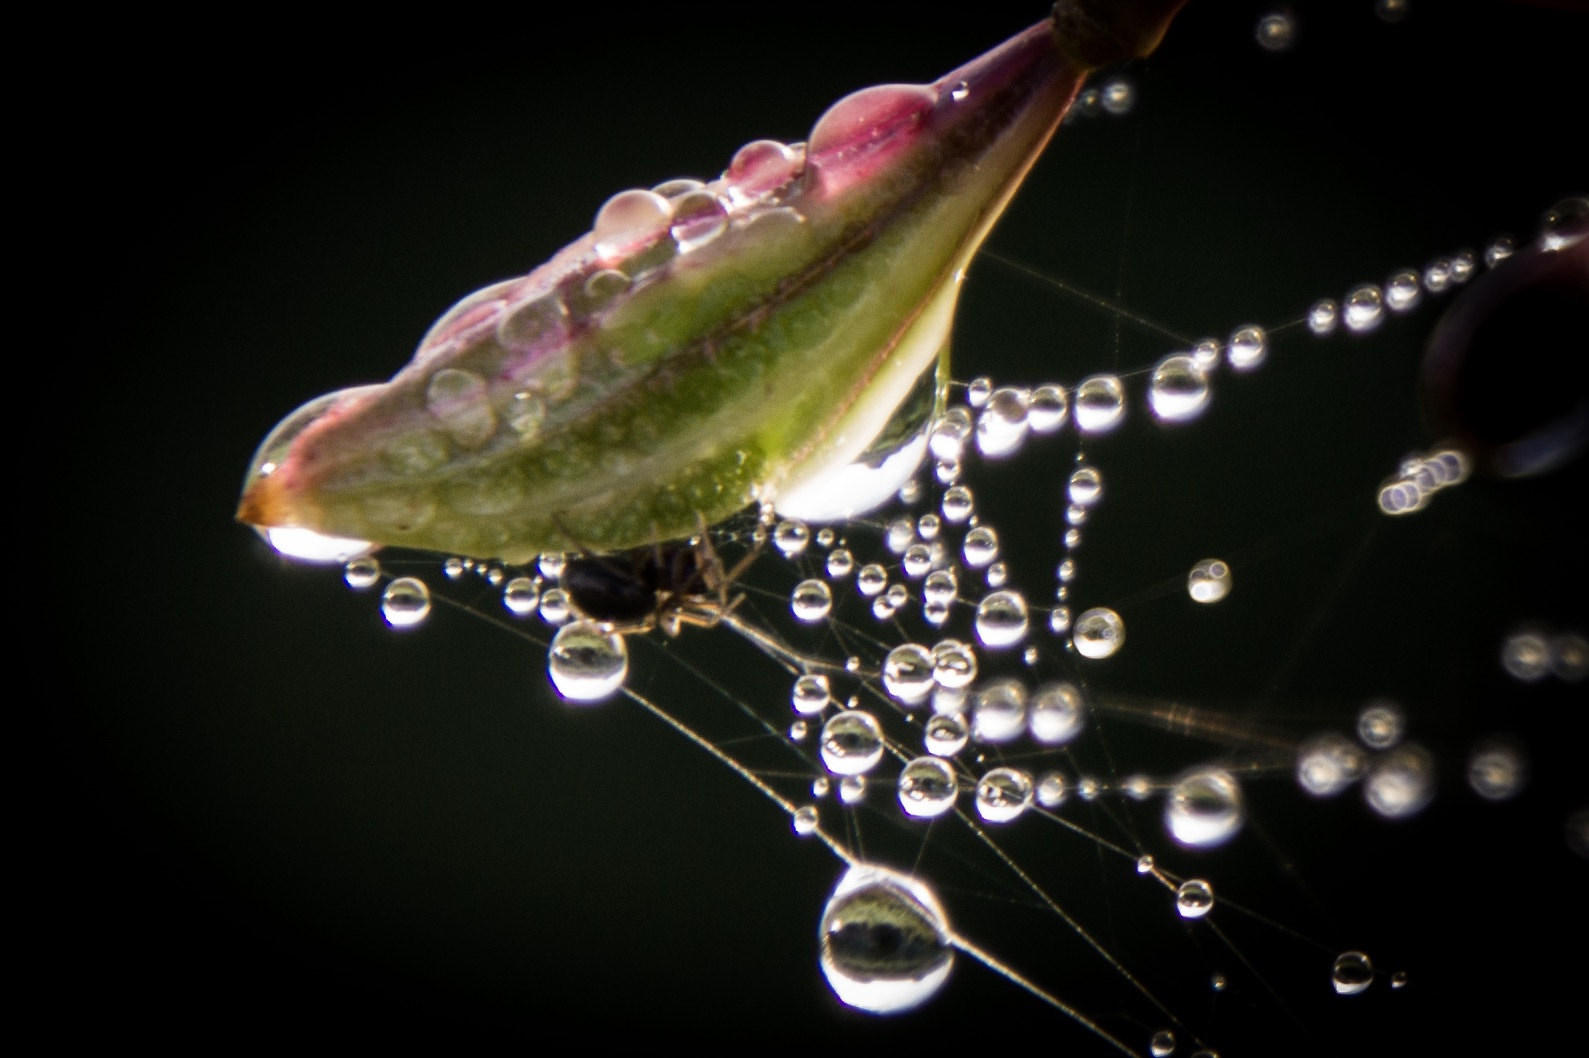 Sony SLT-A58 sample photo. Artful spider web at a late bud with spider photography